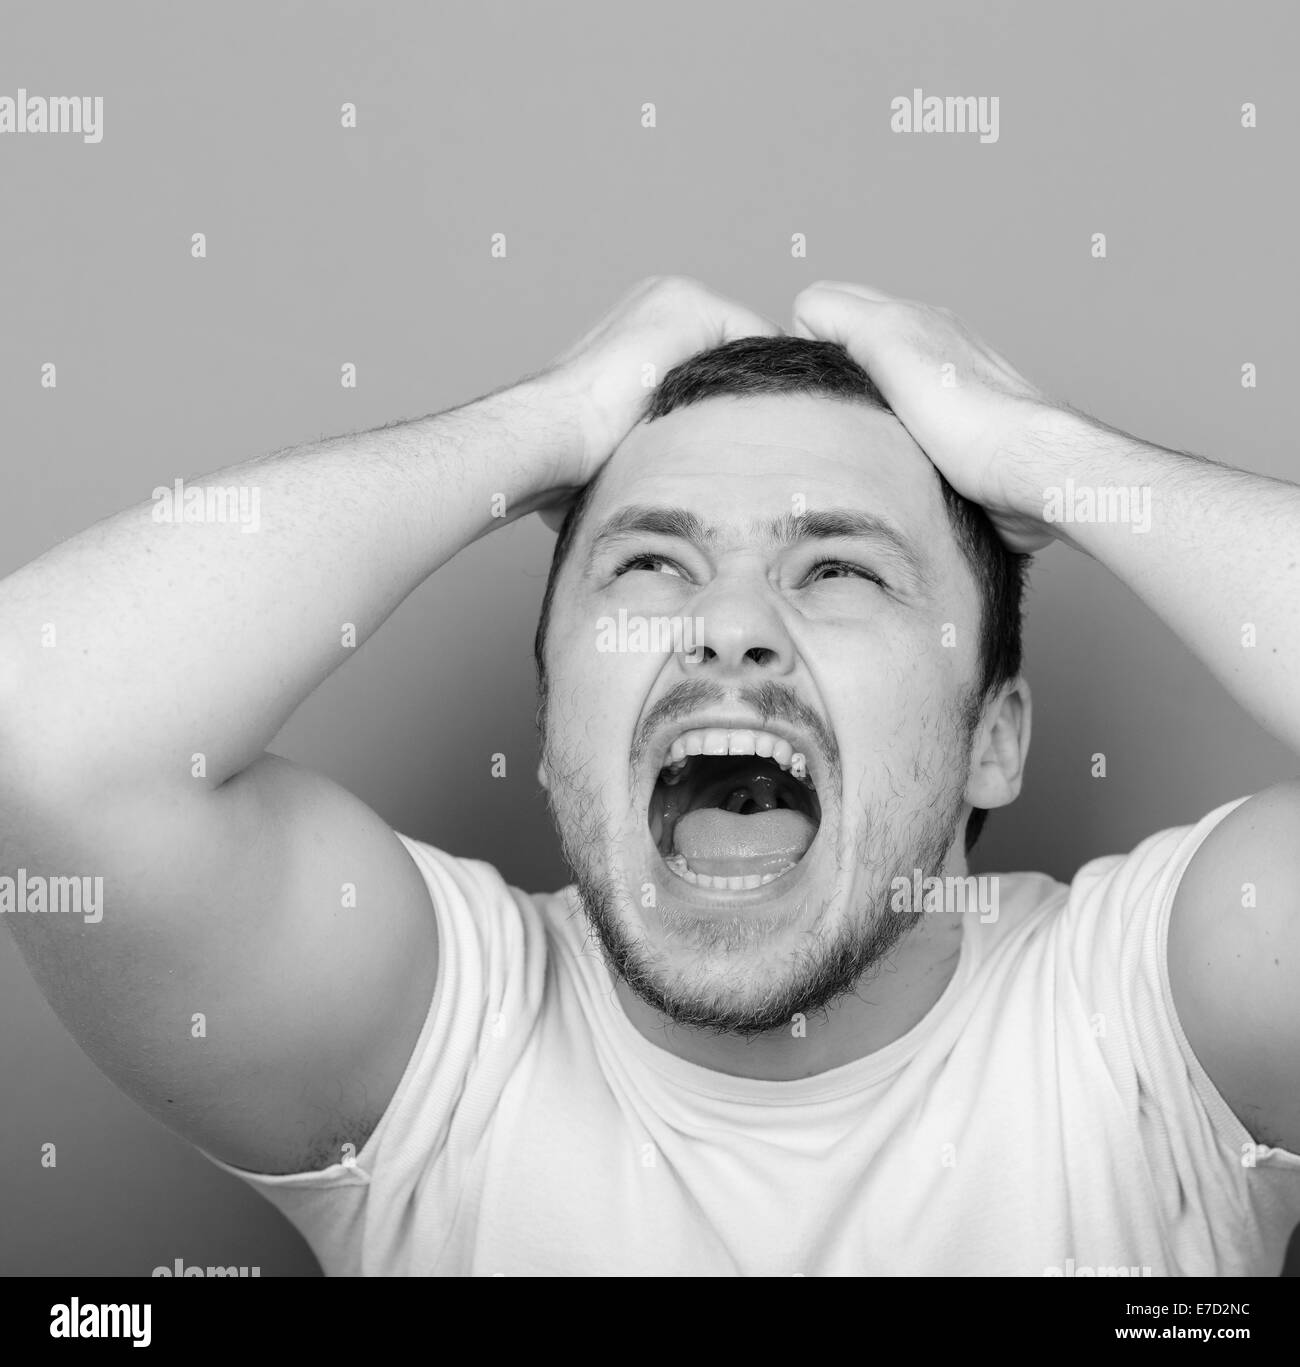 Portrait of angry man screaming and pulling hair - Monocrome or black and white portrait Stock Photo